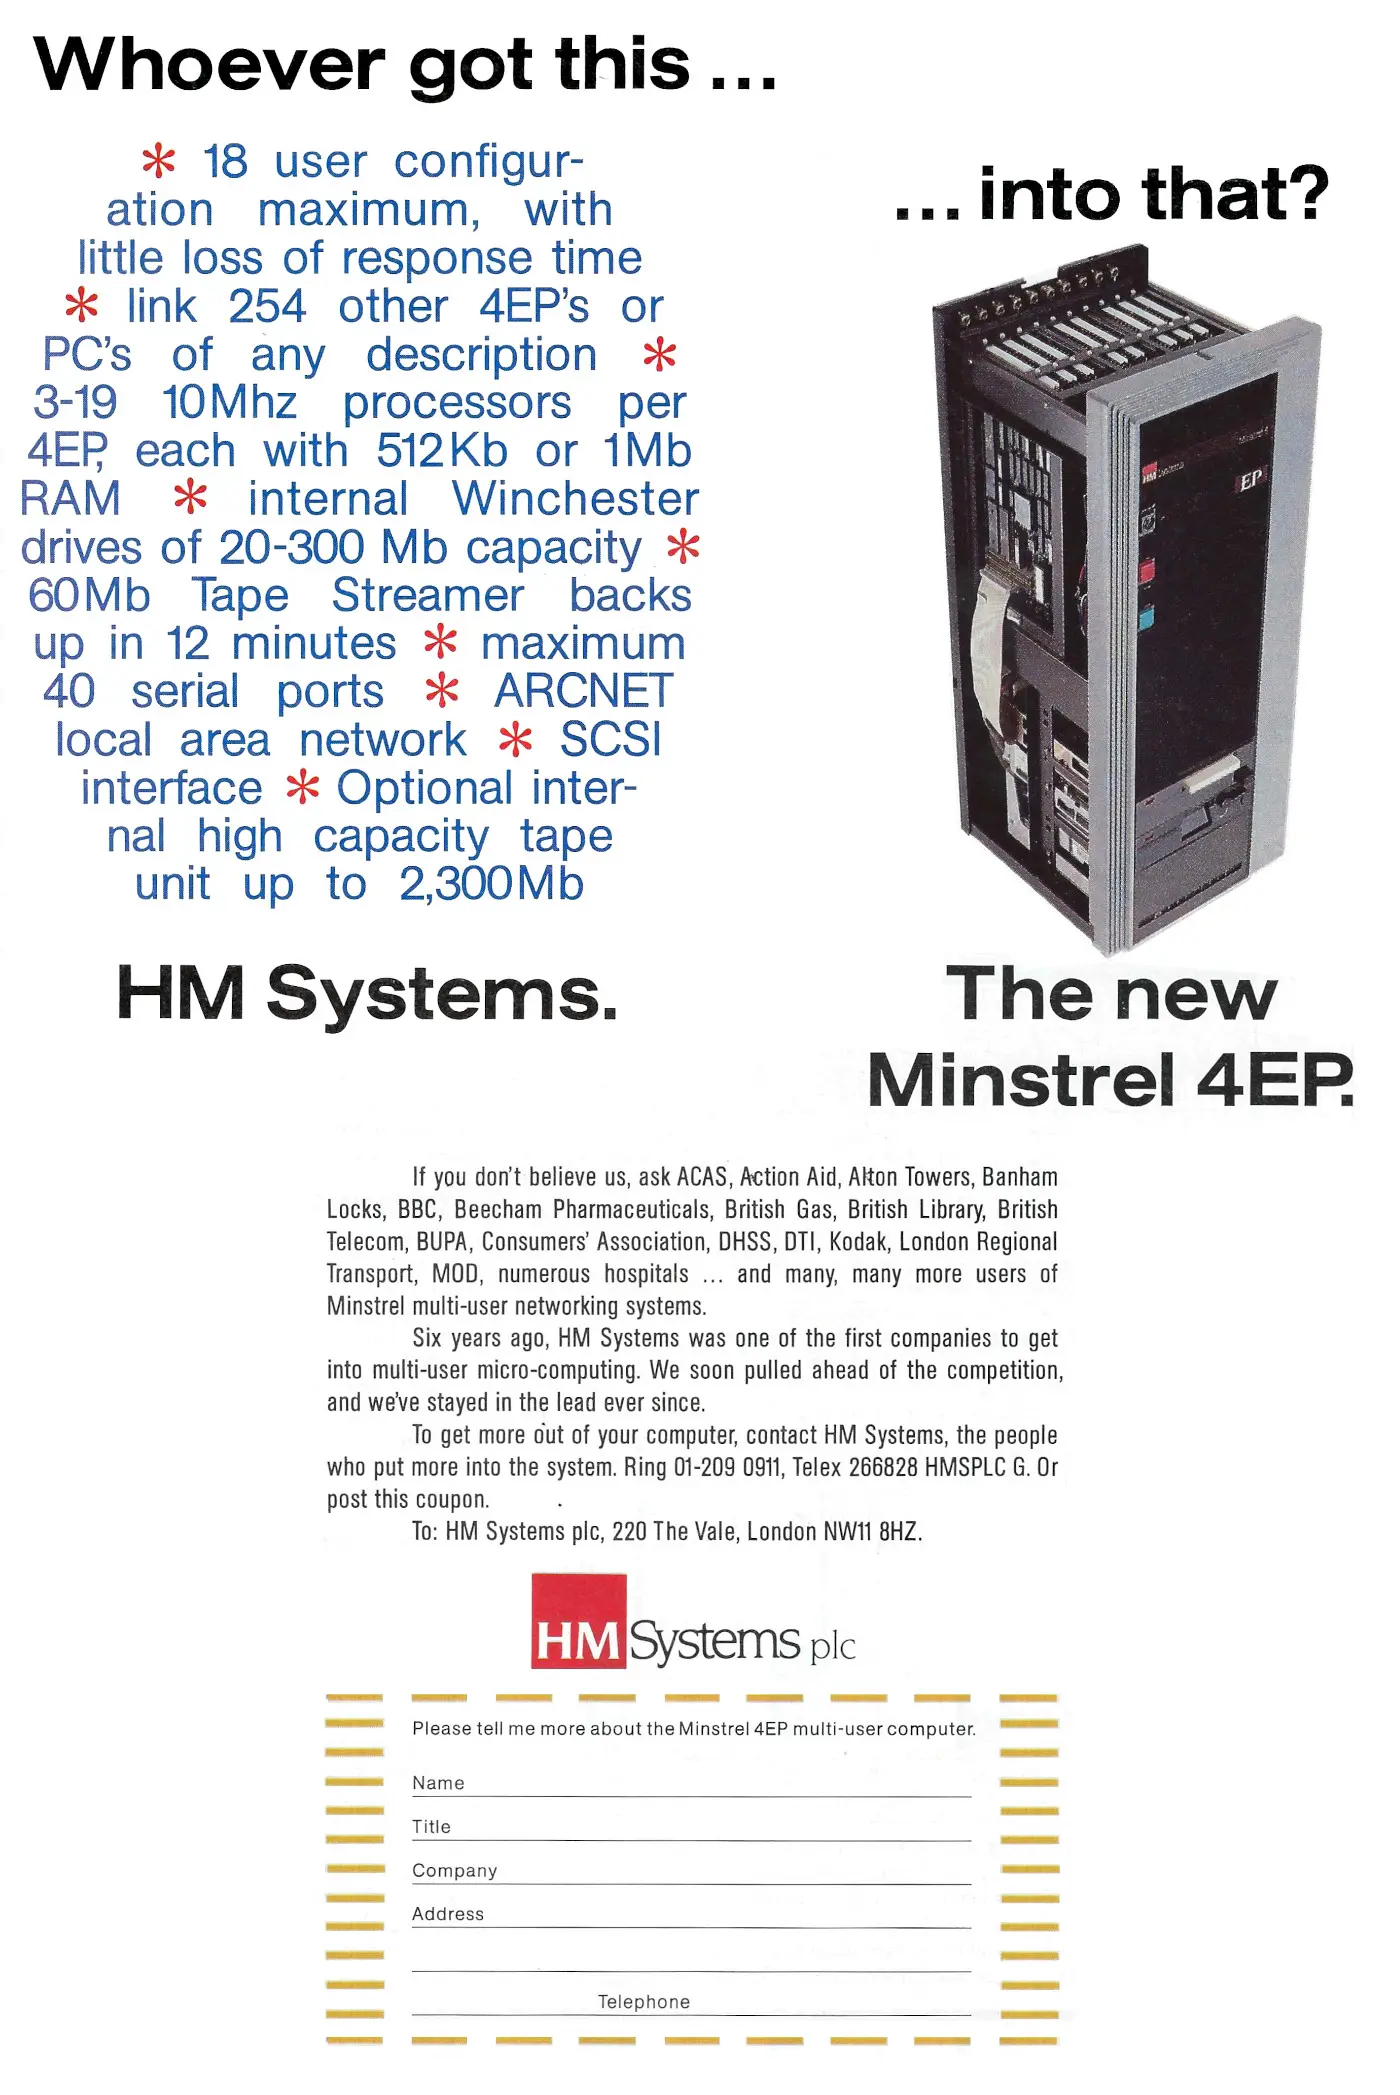 Hotel Microsystems Advert: HM Systems: The new Minstrel 4EP, from Practical Computing, November 1987